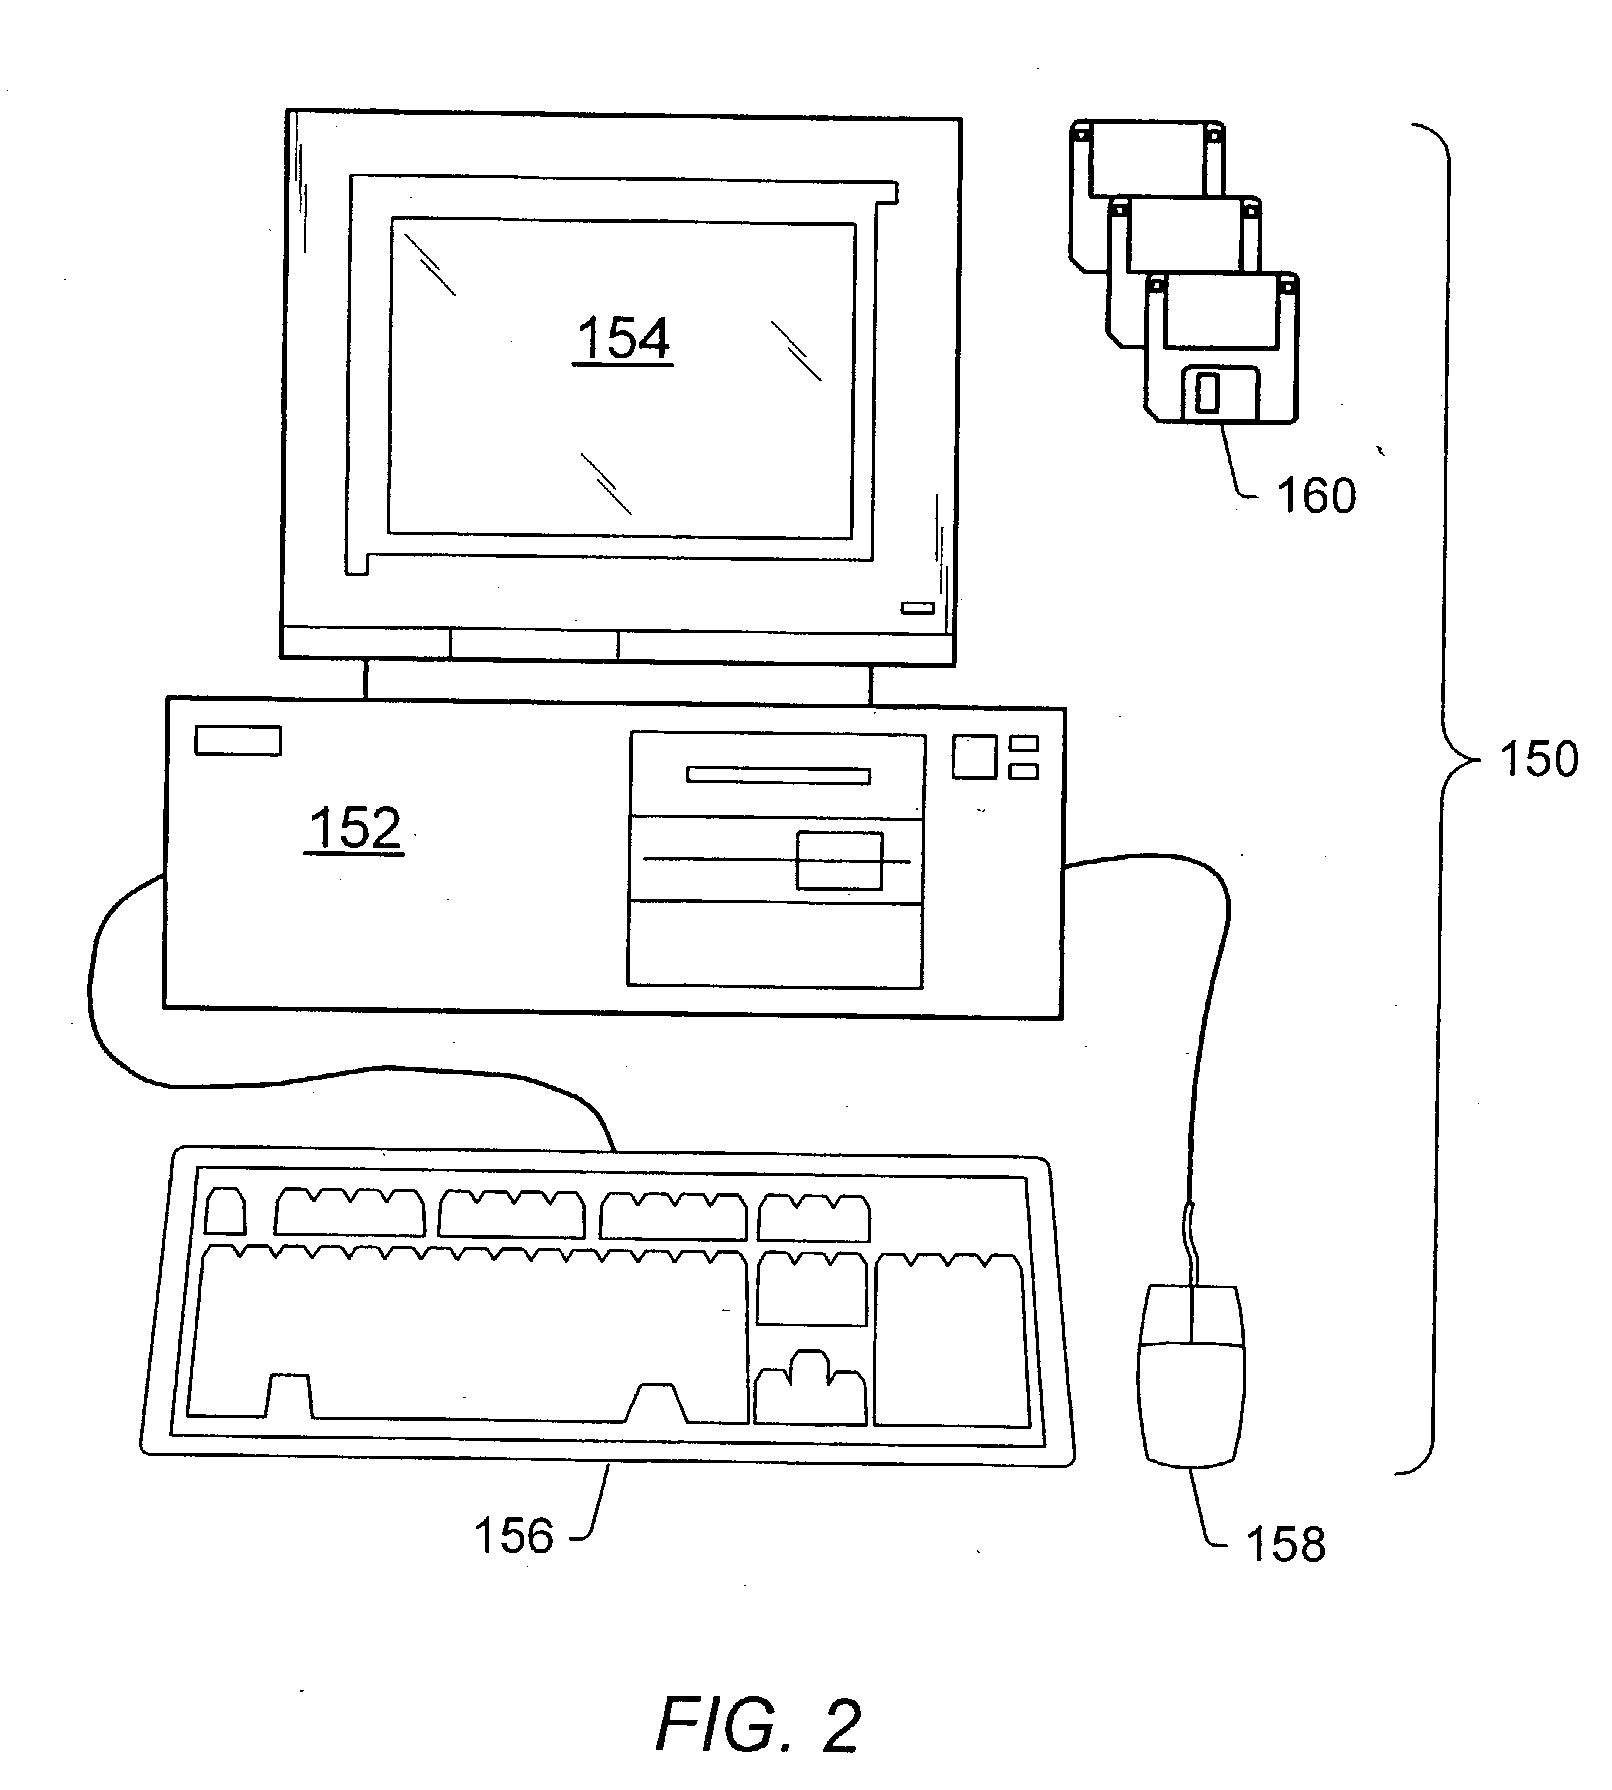 Computerized method and system for estimating an effect on liability using a comparison of the actual speed of vehicles with a specified speed